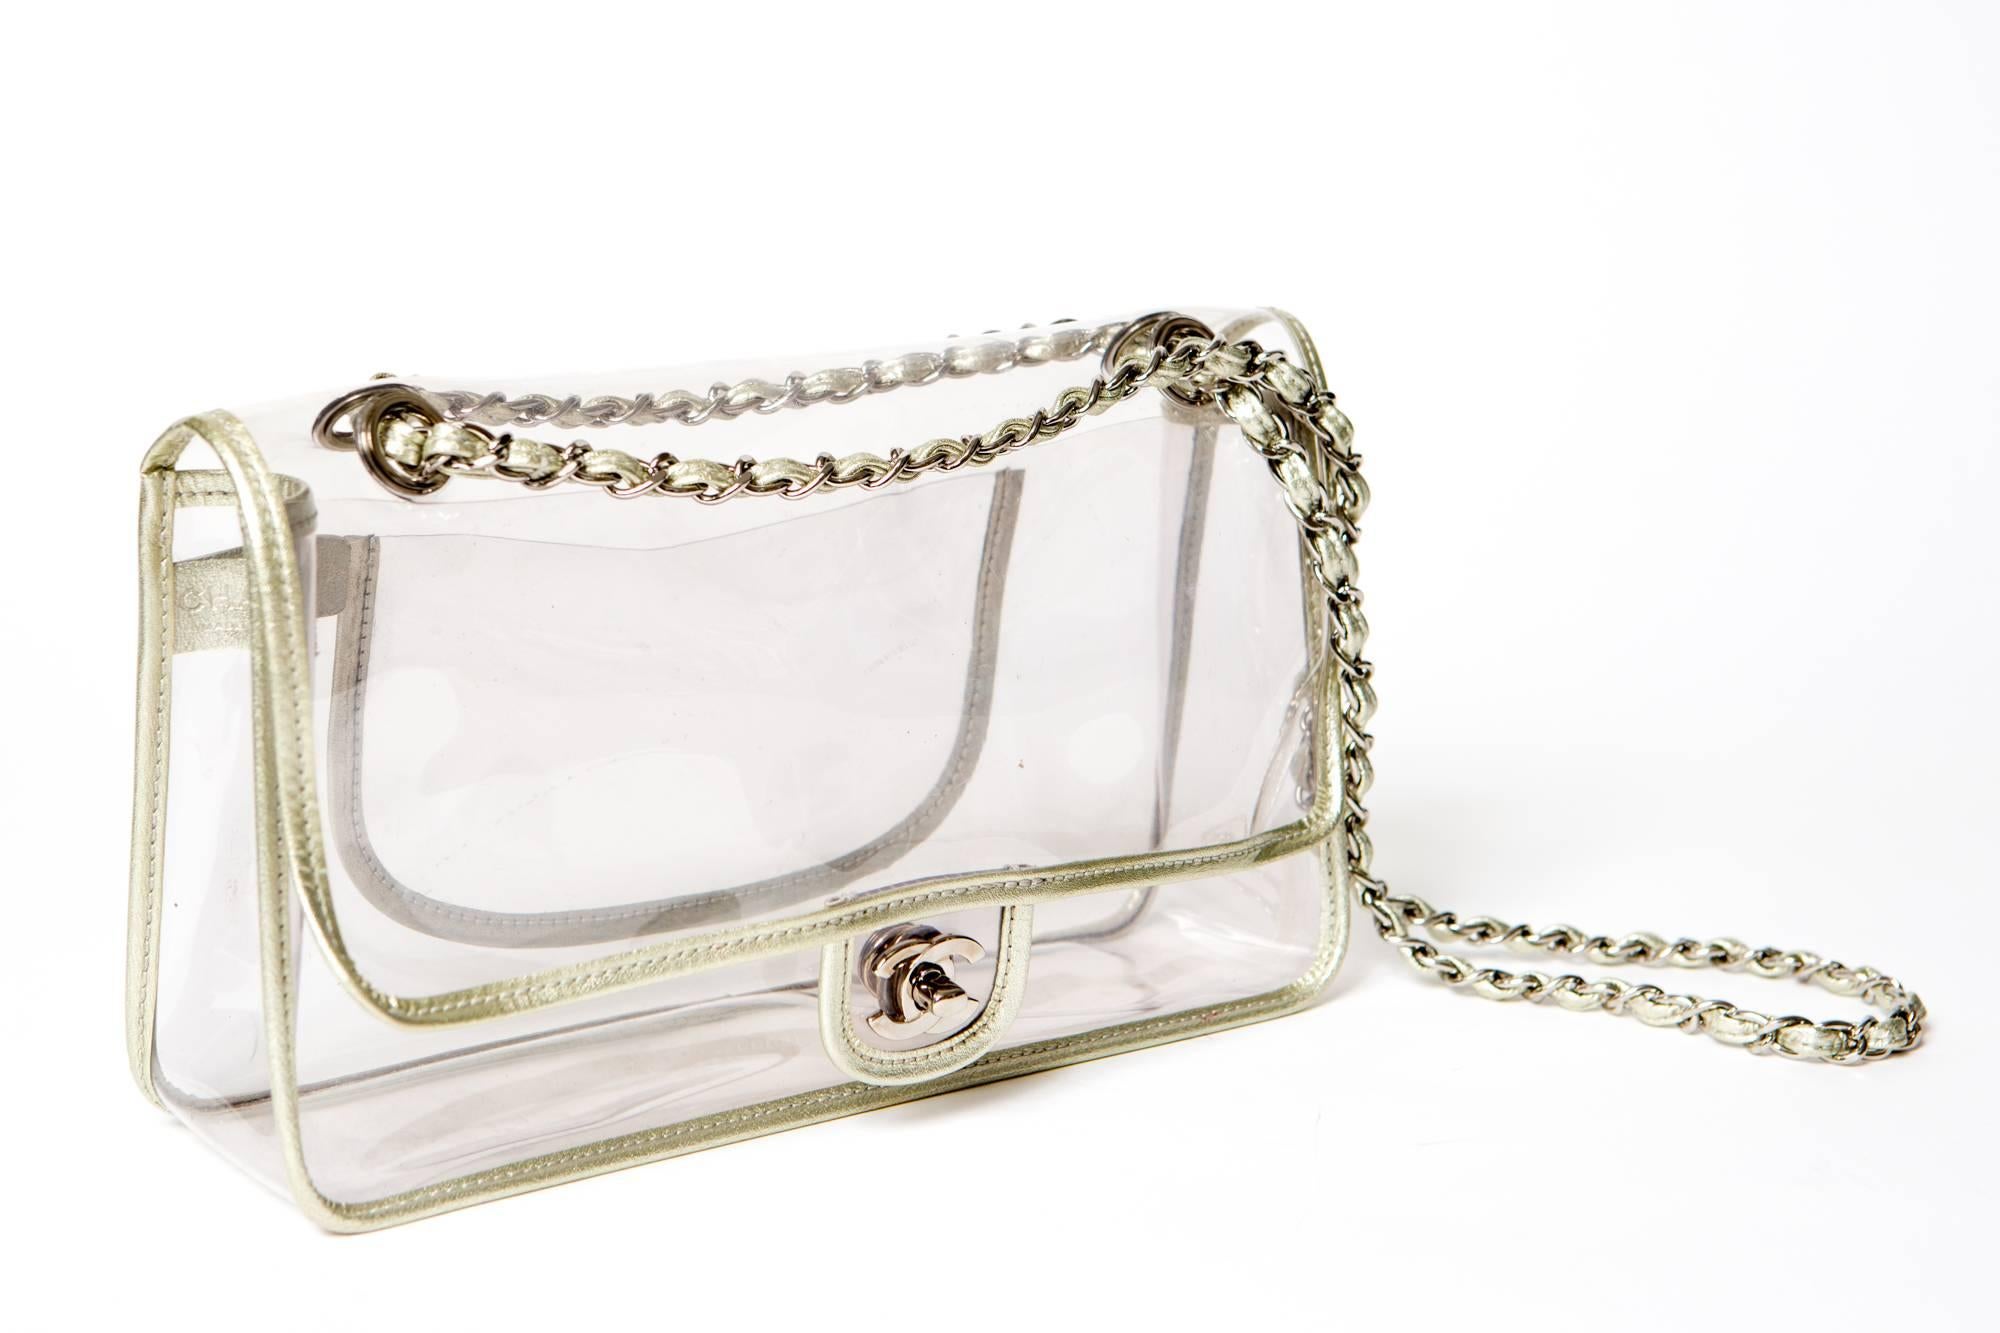 Collector 2.55 Chanel jelly transparent  bag limited edition featuring a white gold tone patent bias, all accessories are silver tone,a CC turn lock closures, a silver tone chain  110cm cross body, a back pocket:19cm x 10cm.
It comes with his black